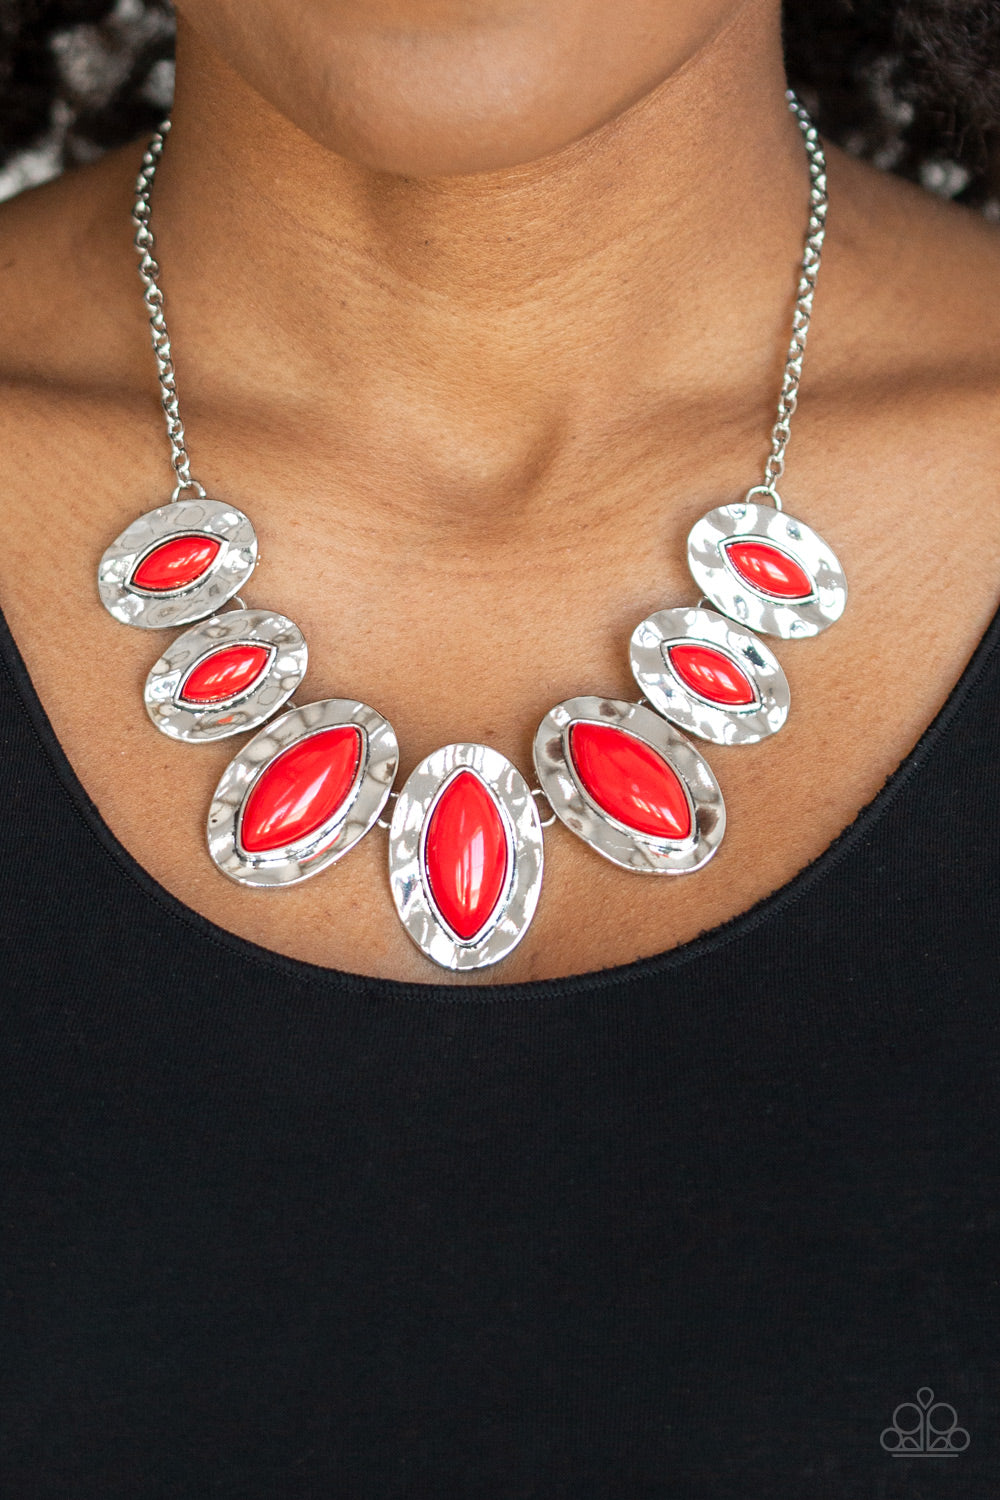 Terra Color - Red Necklace - Paparazzi Accessories - Paparazzi Accessories 